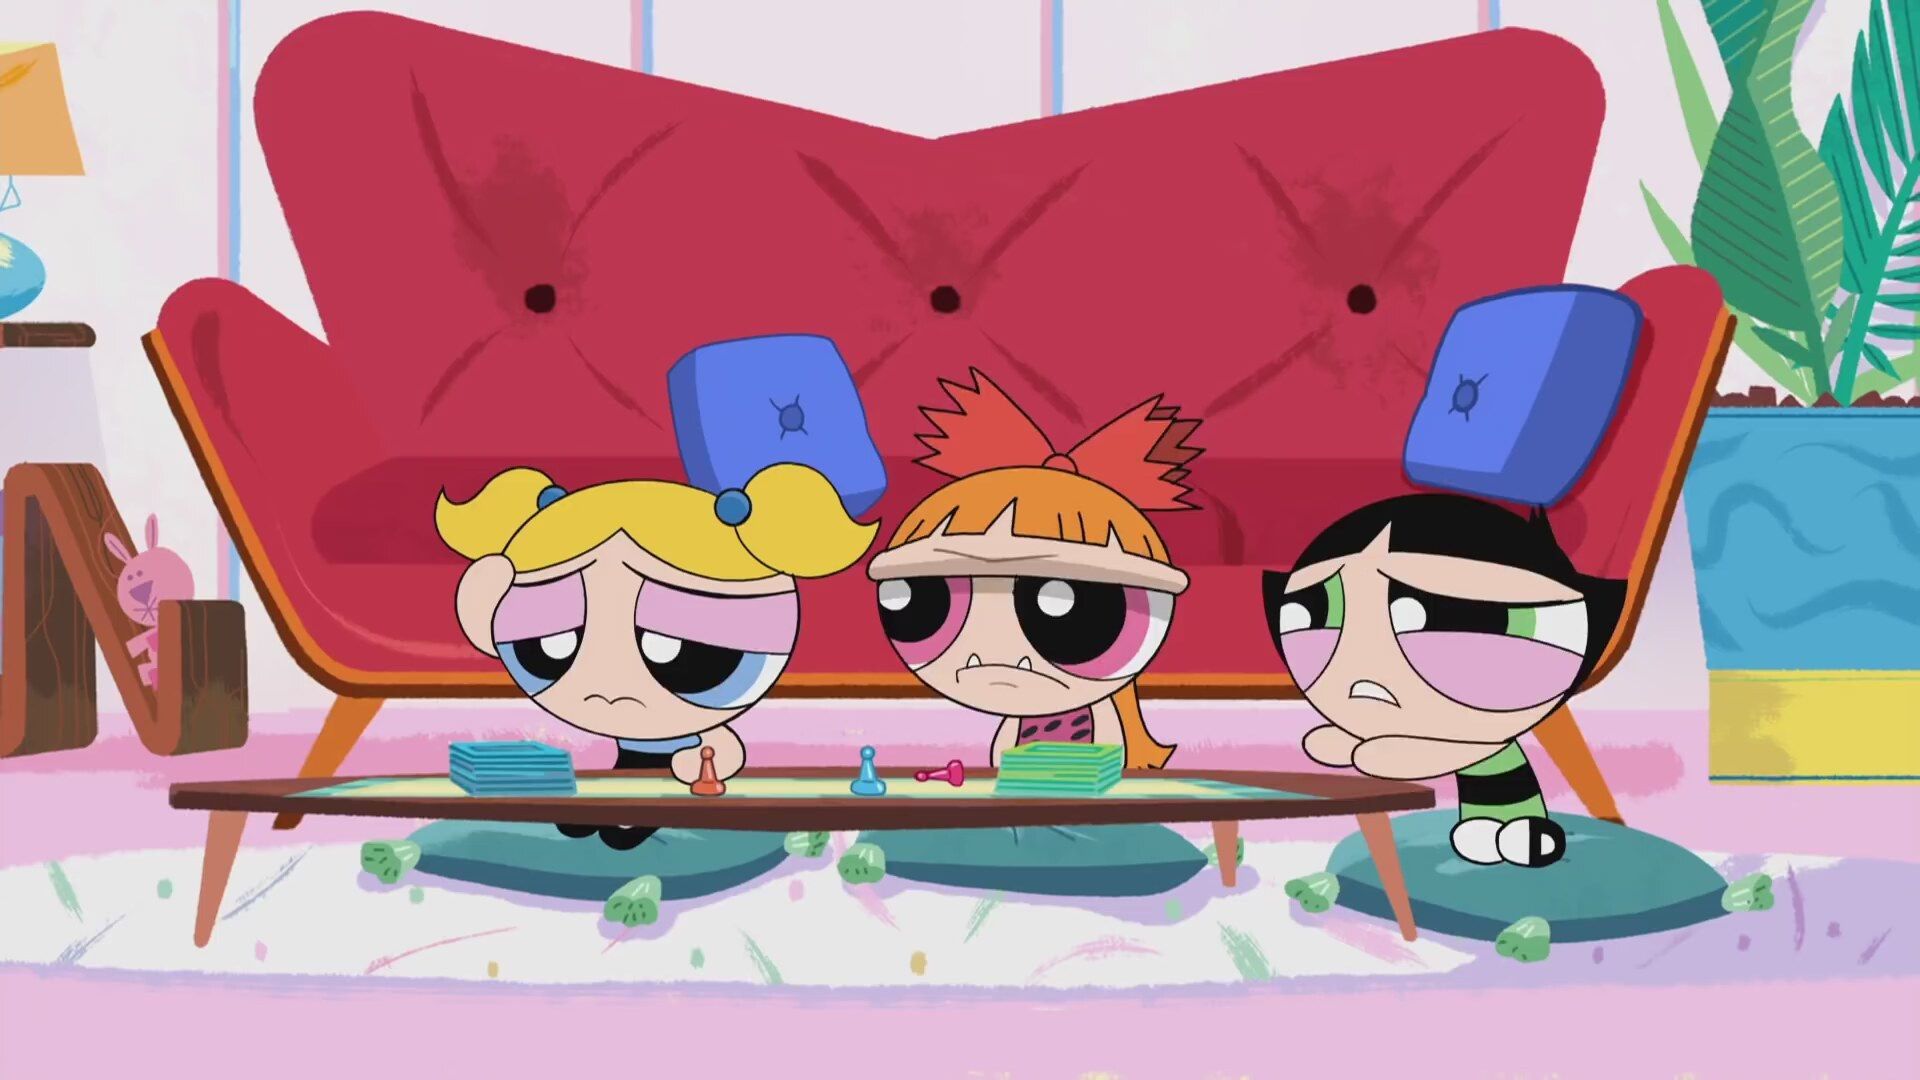 The Powerpuff Girls are sitting on the floor with their heads tilted to the side. - The Powerpuff Girls